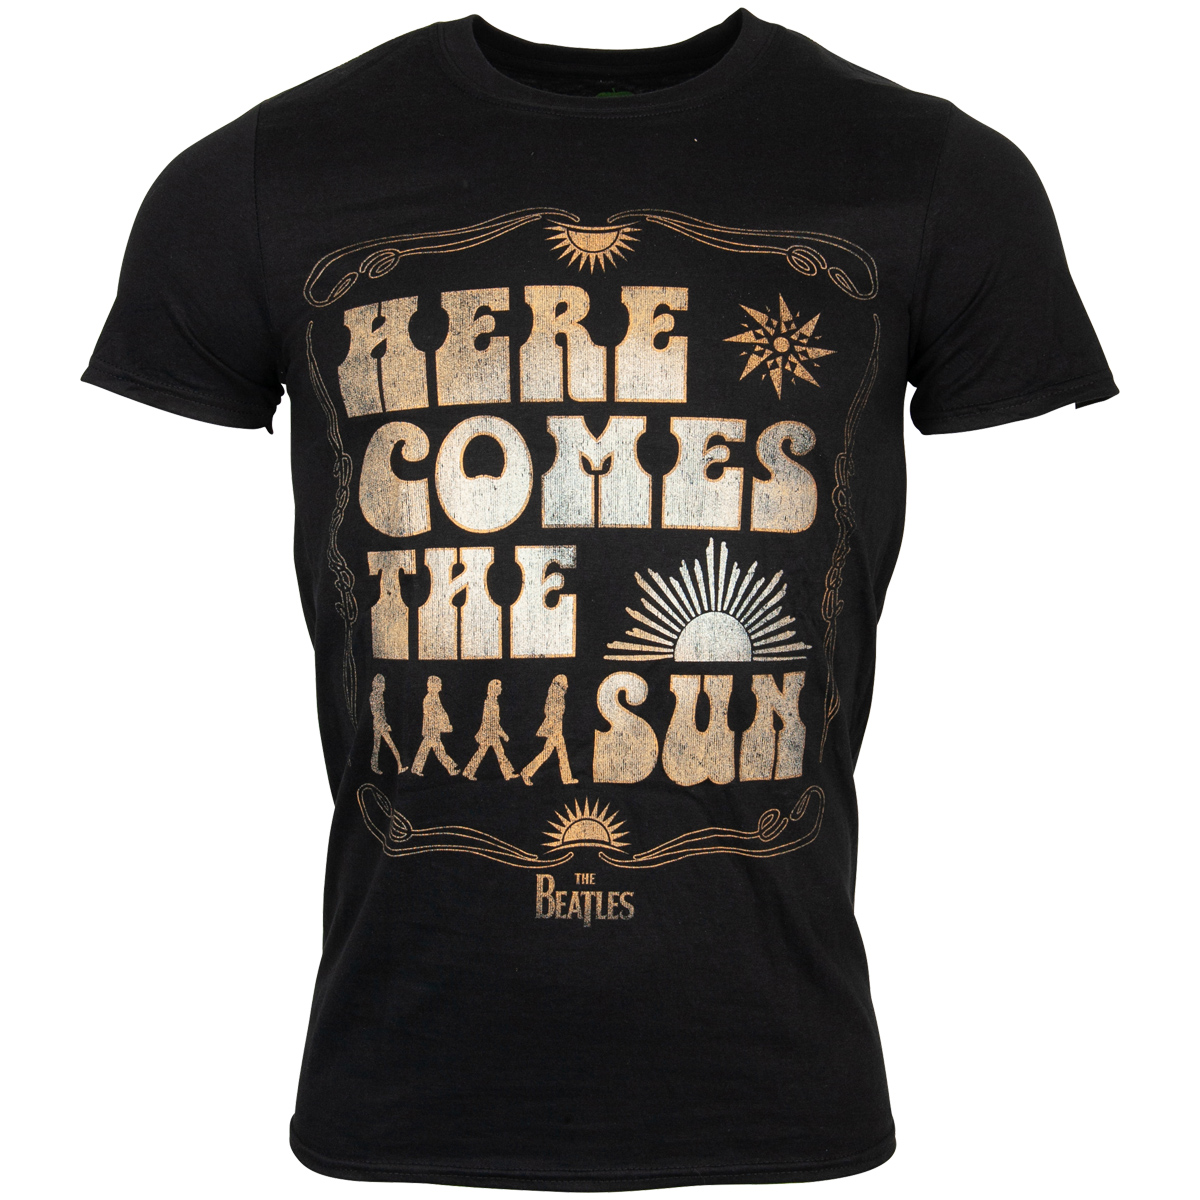 The Beatles - T-Shirt Here Comes The Sun - schwarz